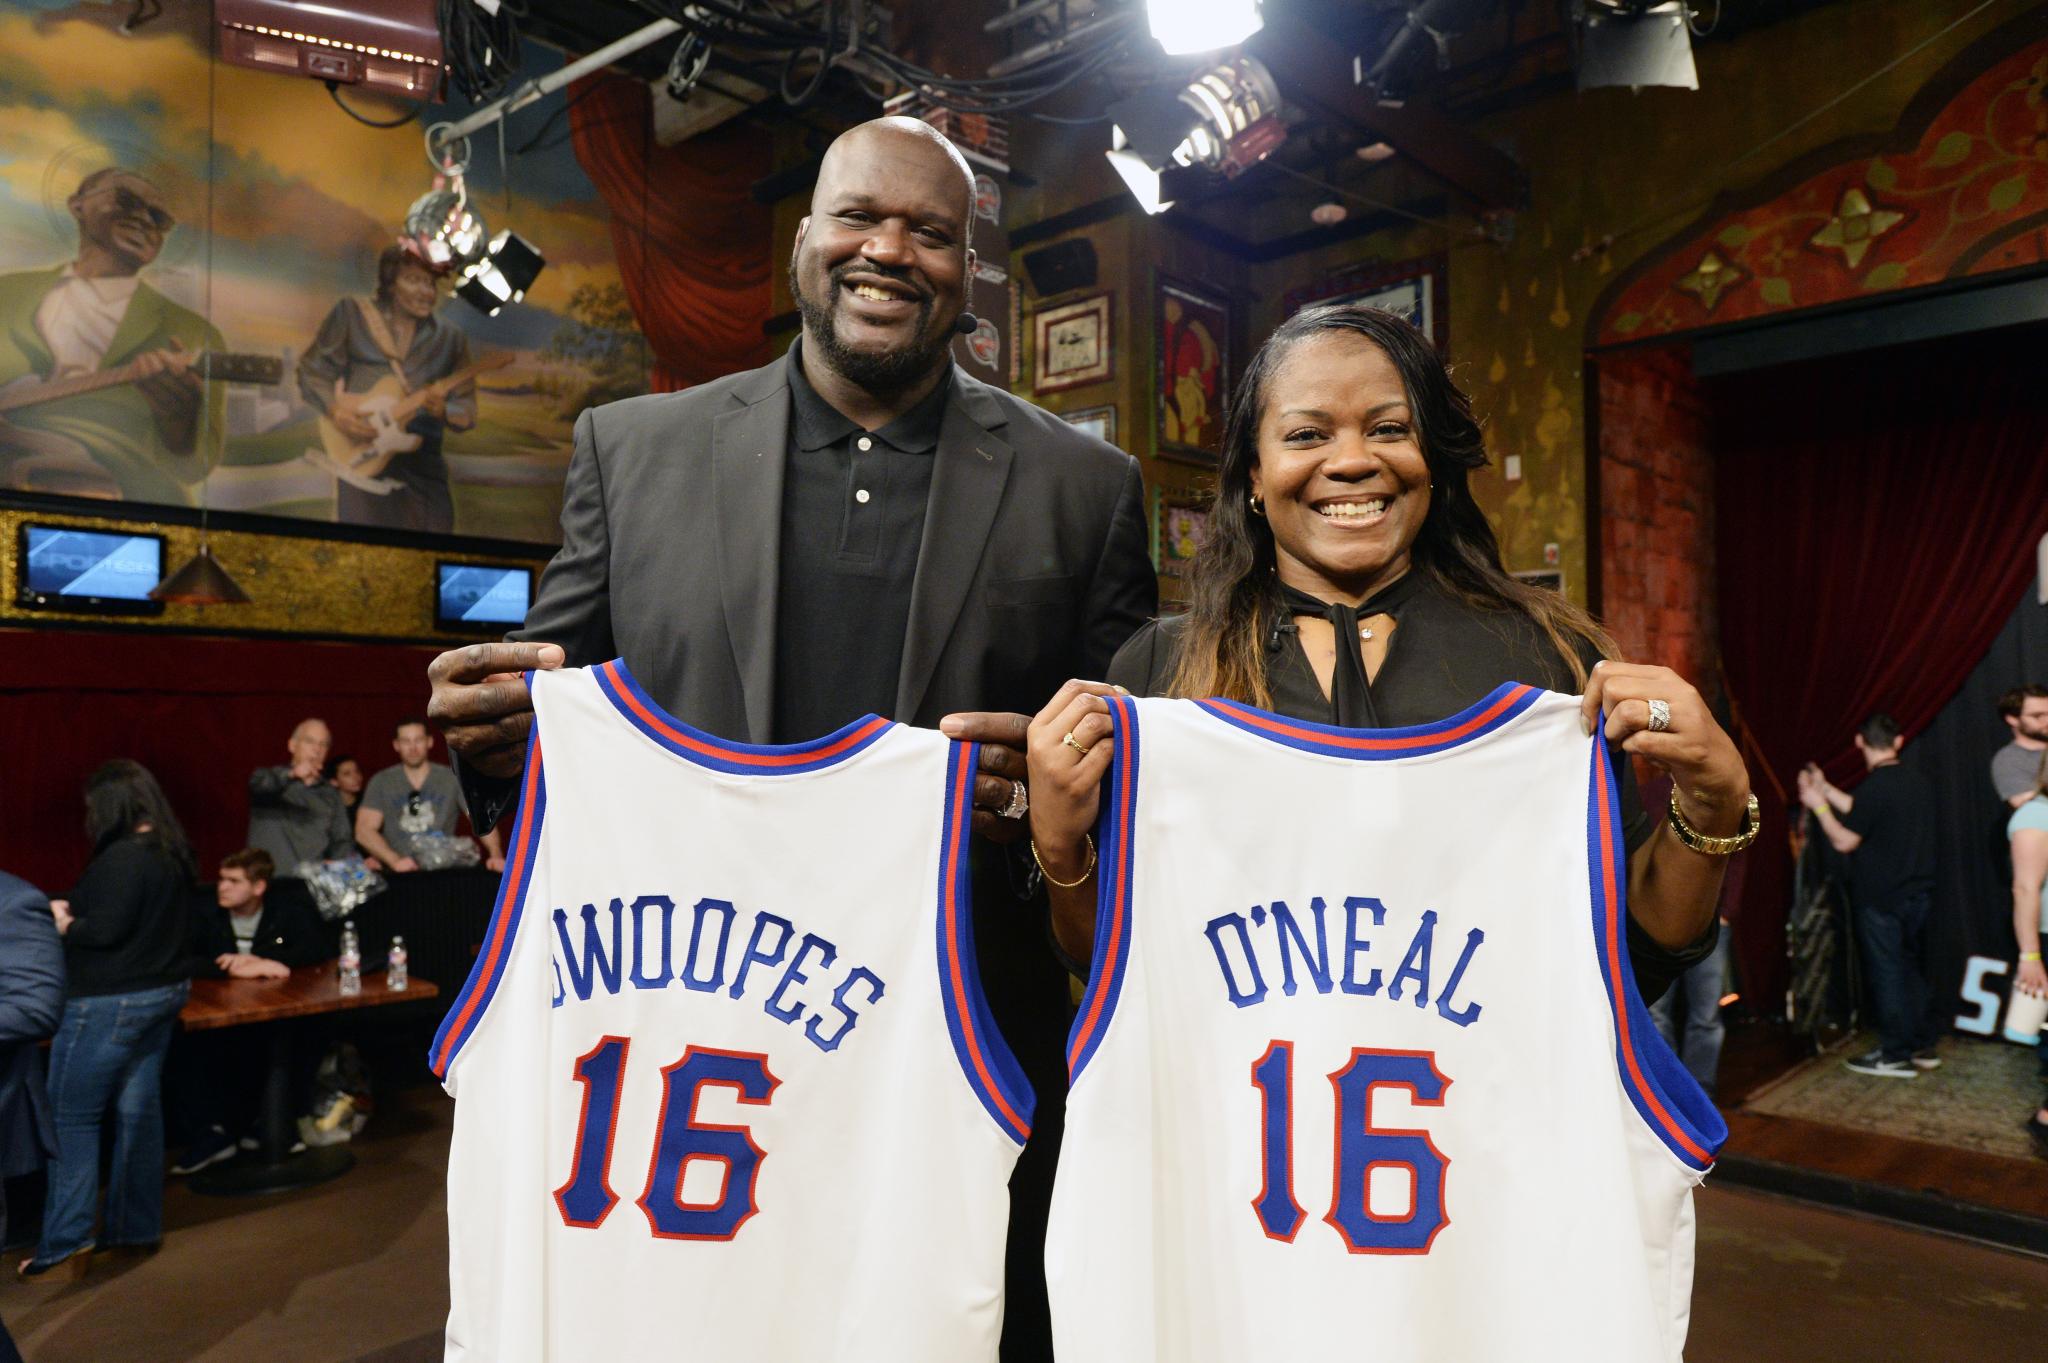 Women's Basketball Legend Sheryl Swoopes Inducted Into the Basketball Hall Of Fame